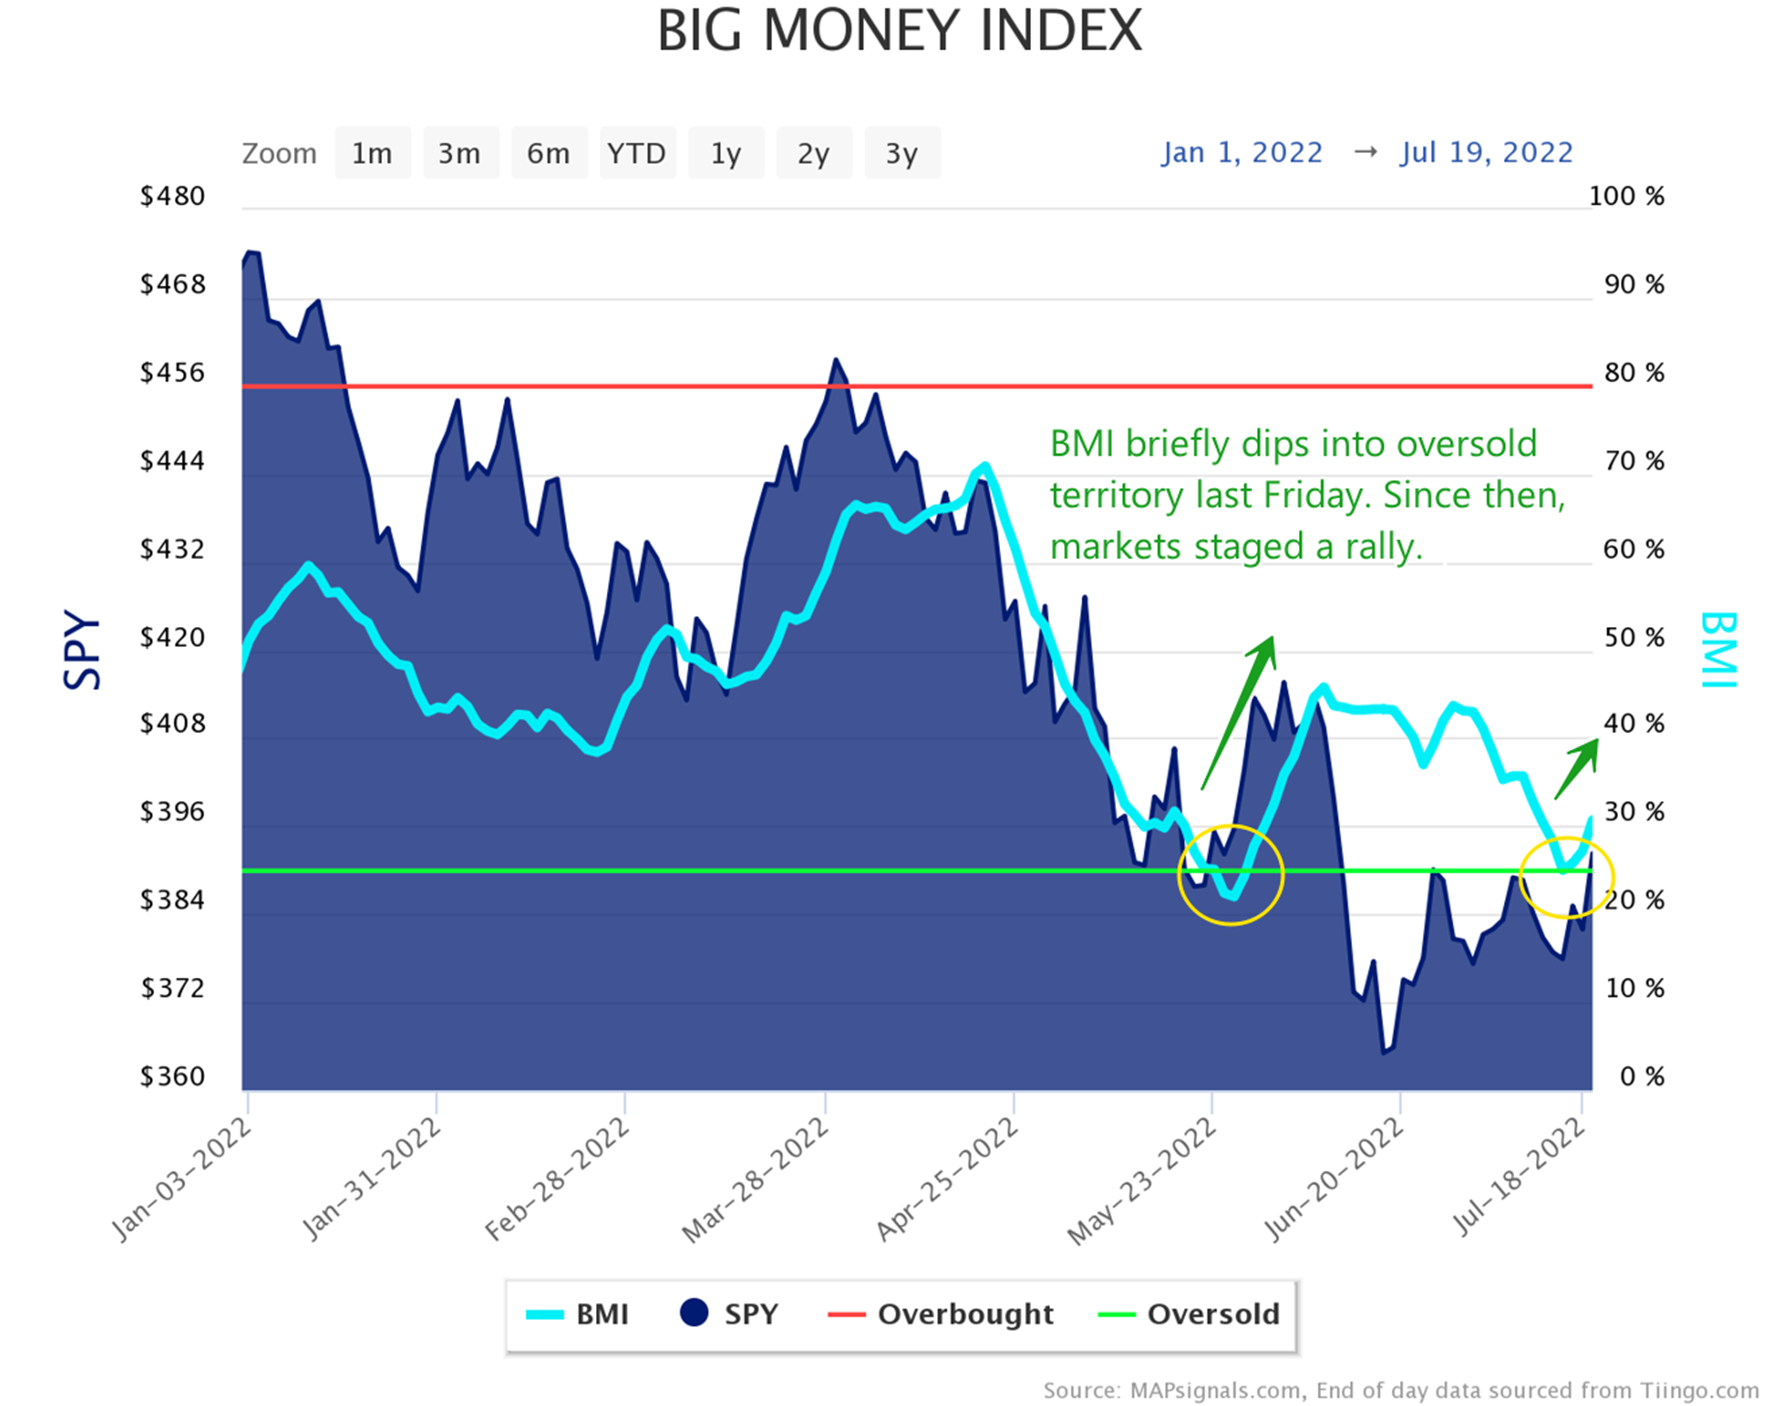 BMI briefly hit oversold last Friday. Markets then staged a rally.